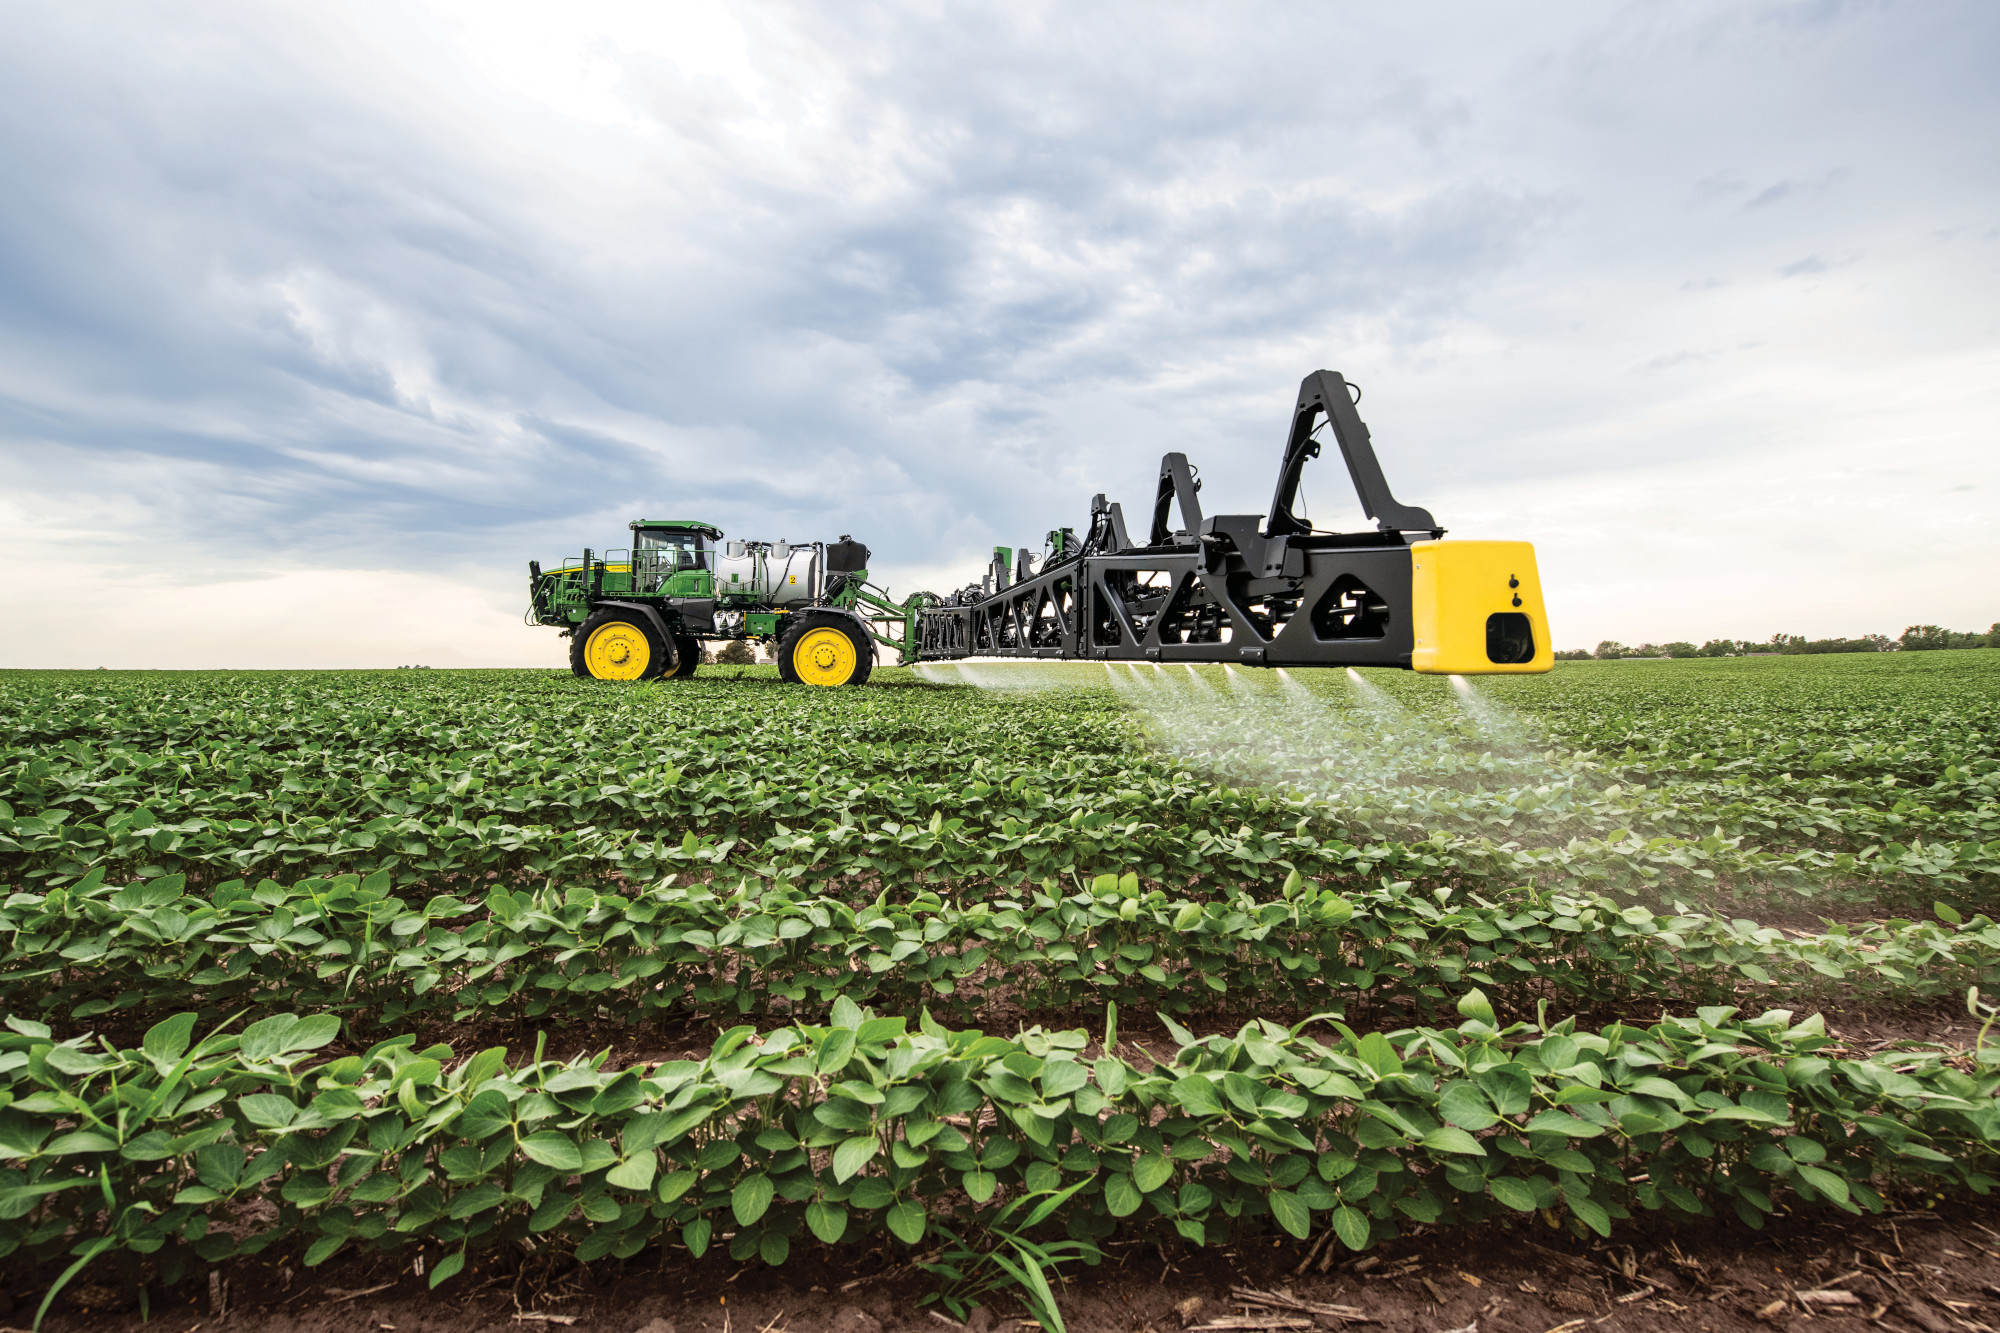 See and Spray rig at work in a soybean field